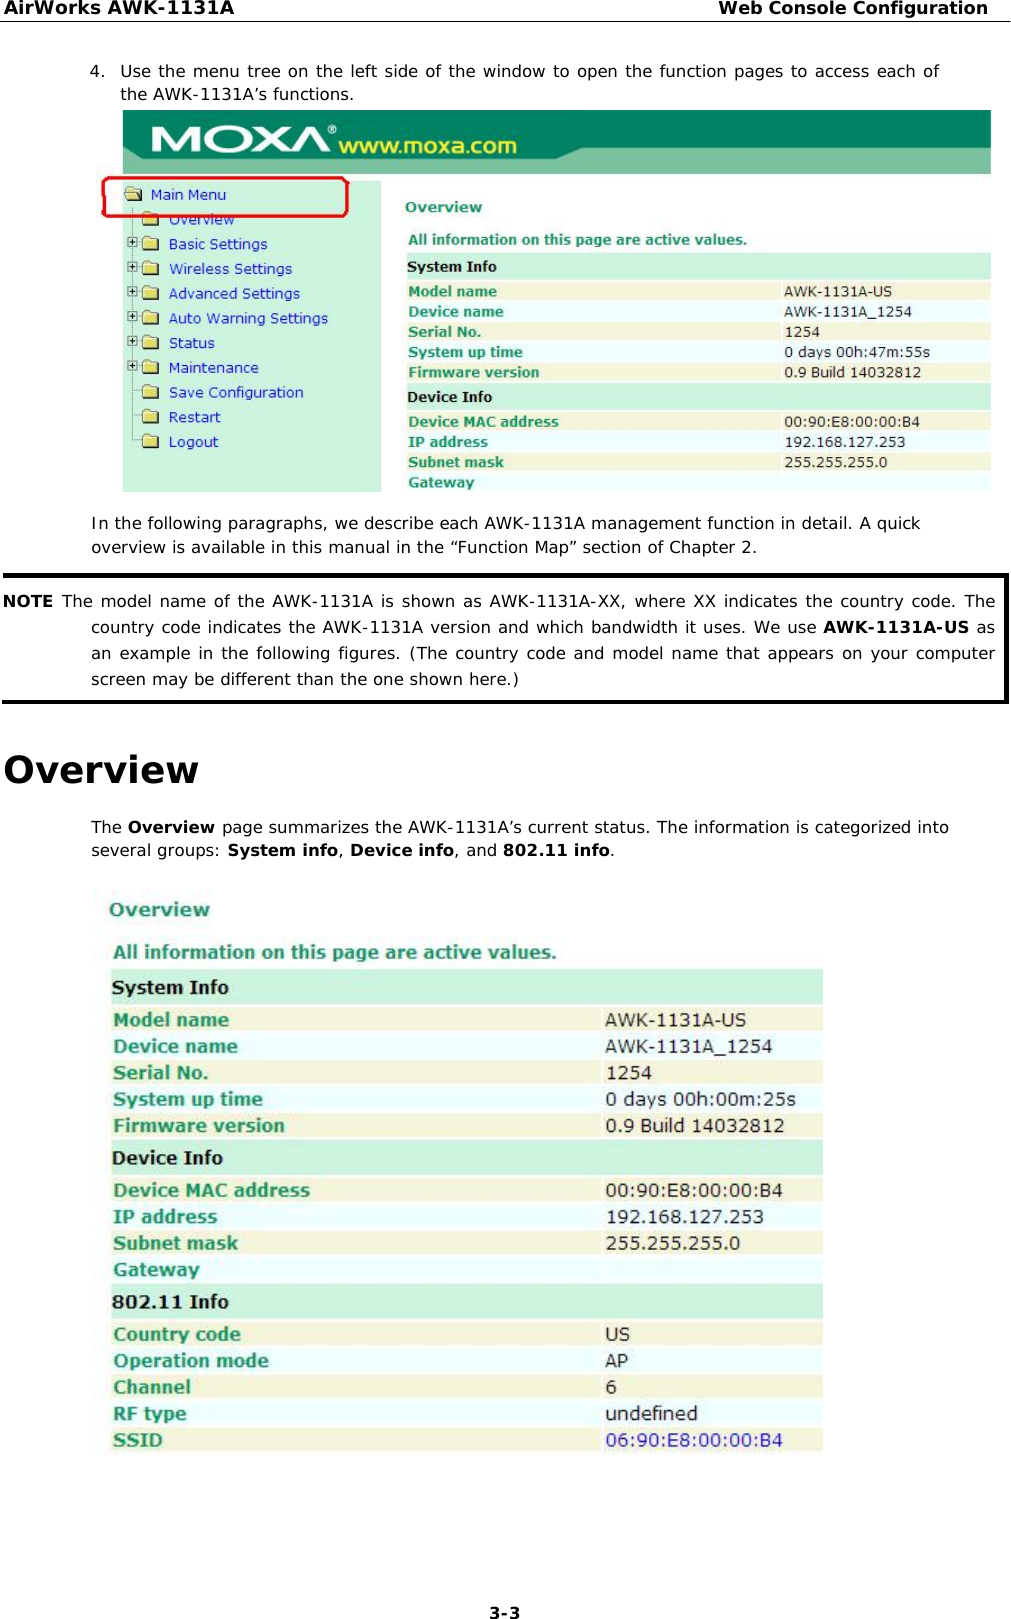 AirWorks AWK-1131A Web Console Configuration   4. Use the menu tree on the left side of the window to open the function pages to access each of the AWK-1131A’s functions.                     In the following paragraphs, we describe each AWK-1131A management function in detail. A quick overview is available in this manual in the “Function Map” section of Chapter 2.  NOTE The model name of the AWK-1131A is shown as AWK-1131A-XX, where XX indicates the country code. The country code indicates the AWK-1131A version and which bandwidth it uses. We use AWK-1131A-US as an example in the following figures. (The country code and model name that appears on your computer screen may be different than the one shown here.)   Overview  The Overview page summarizes the AWK-1131A’s current status. The information is categorized into several groups: System info, Device info, and 802.11 info.                                    3-3 